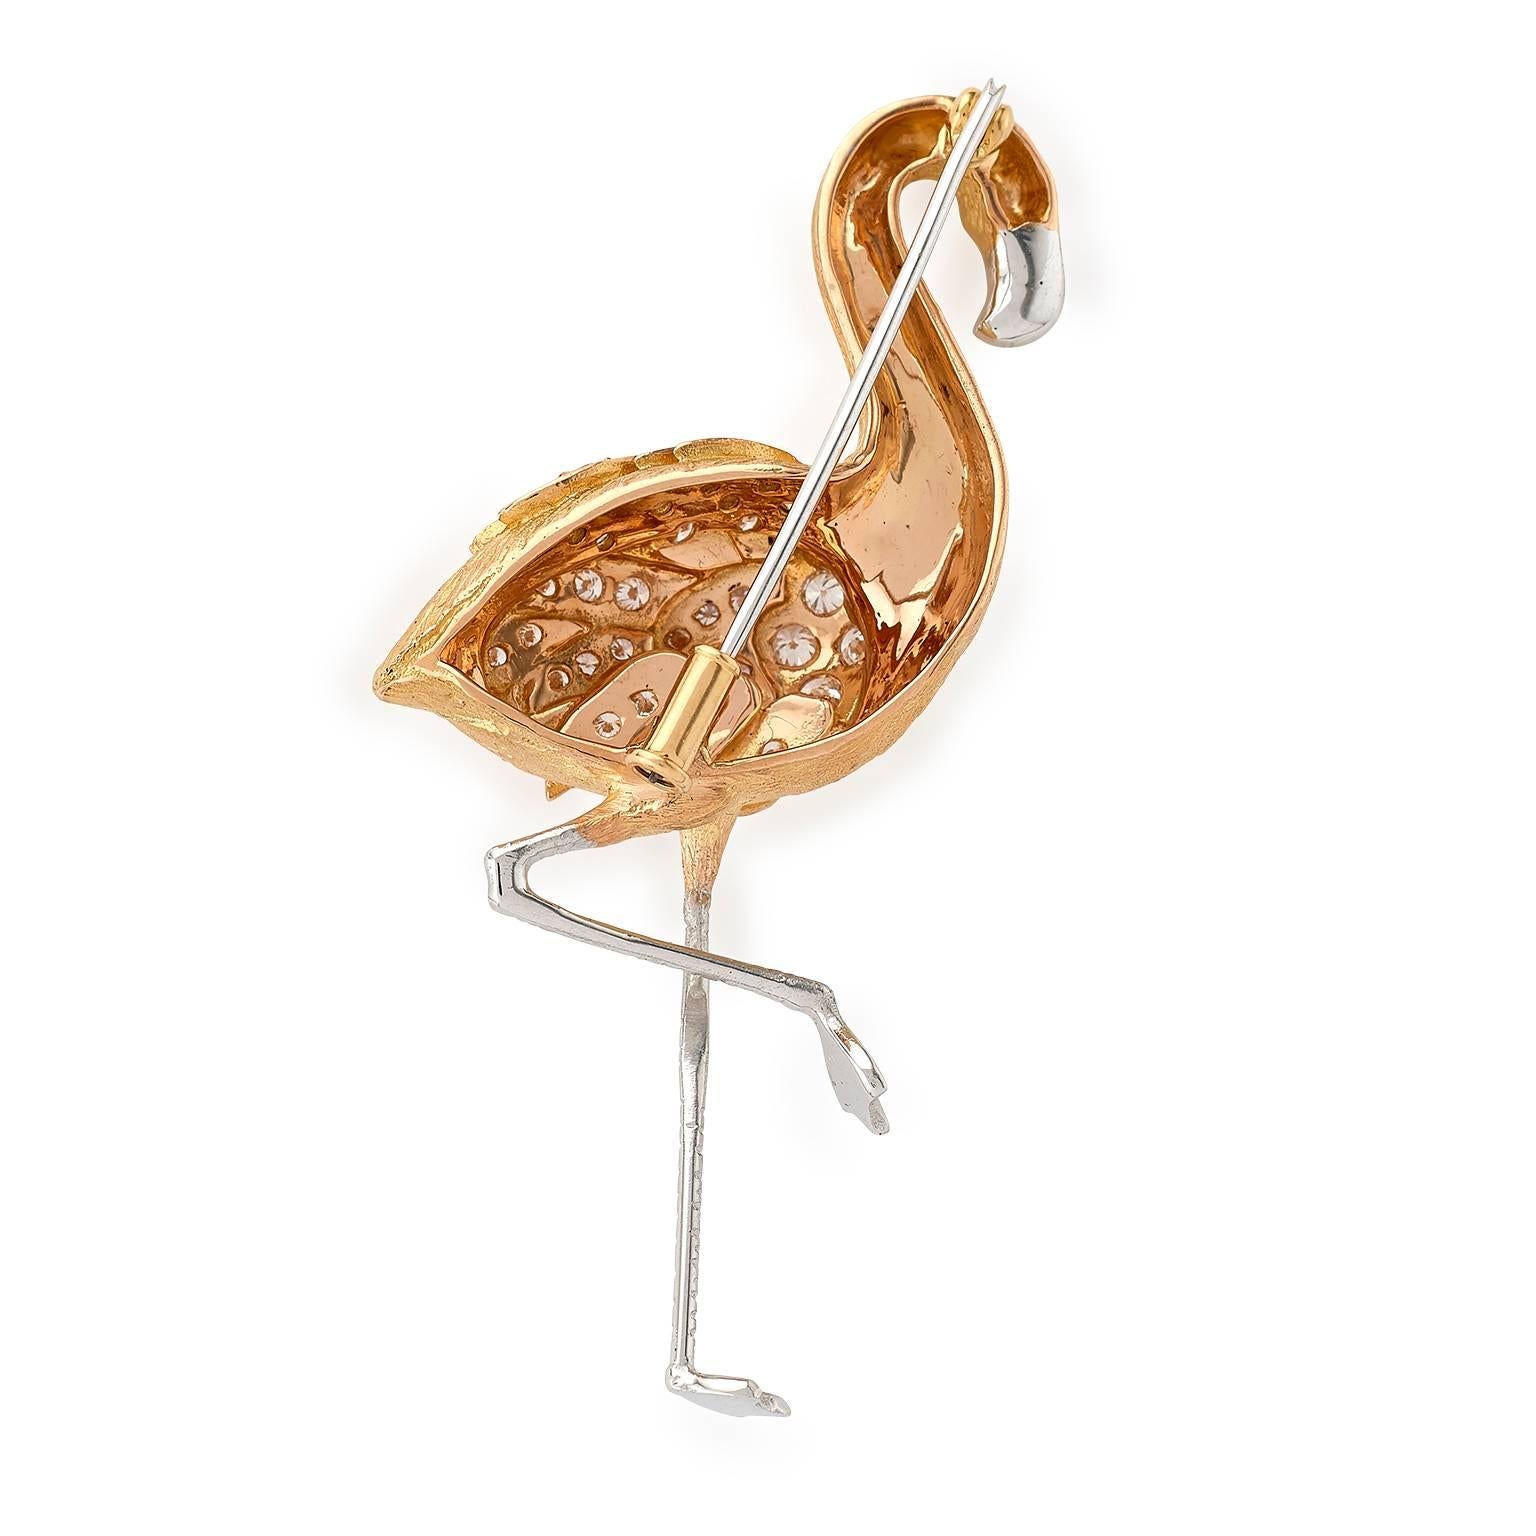 Flamingo brooch with 18 carat rose gold body and .74 carats diamonds set to wings, 18 carat white gold beak and legs, cabochon ruby eye and textured body. With easy to use yet secure tube catch brooch fitting. Handmade in E Wolfe and Company’s